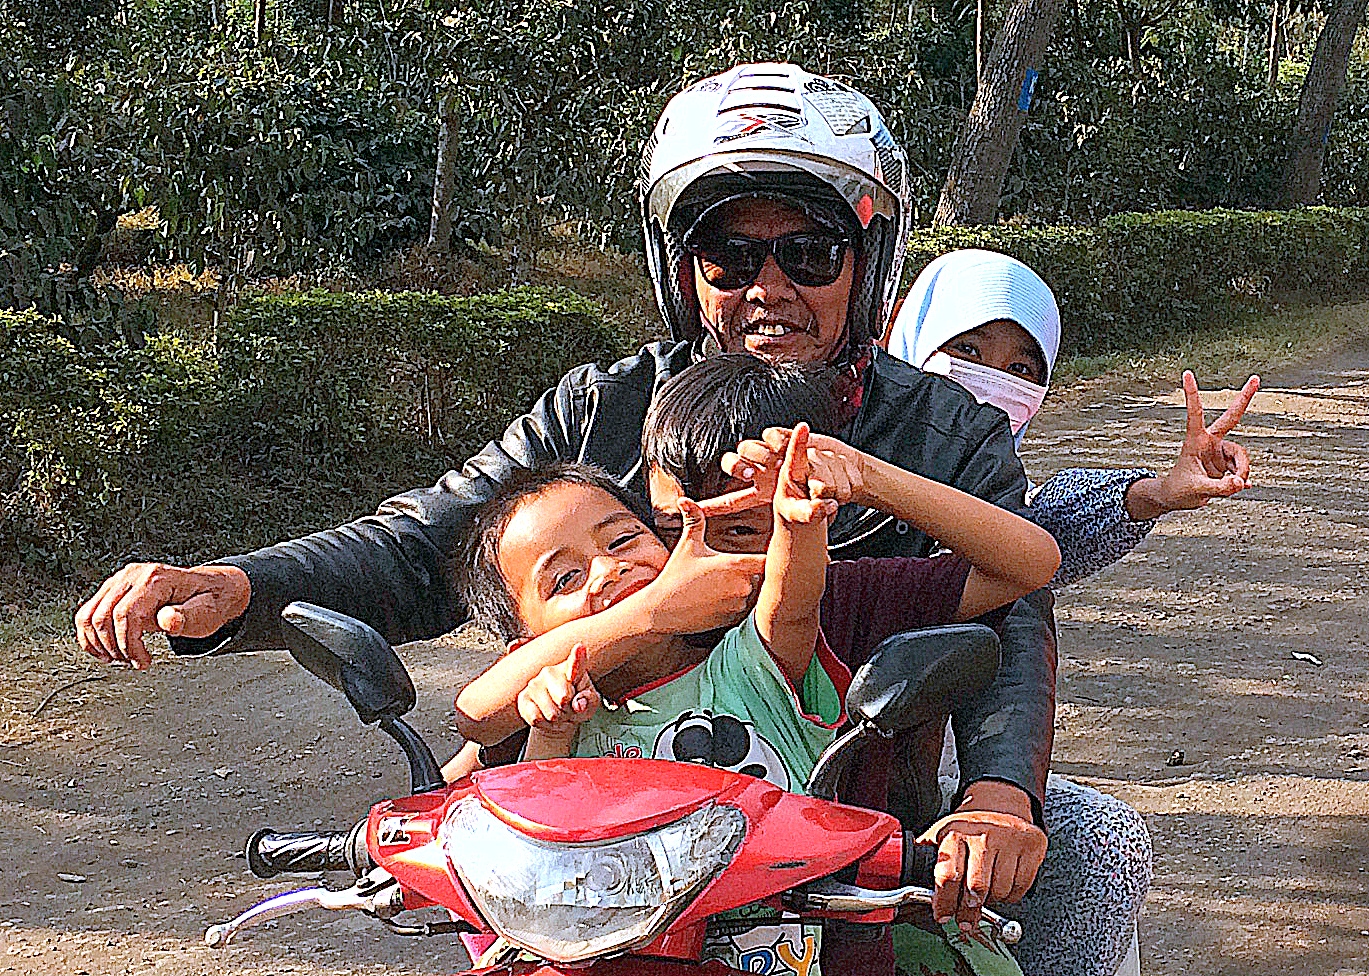 Indonesians – They’re Just Like Us!